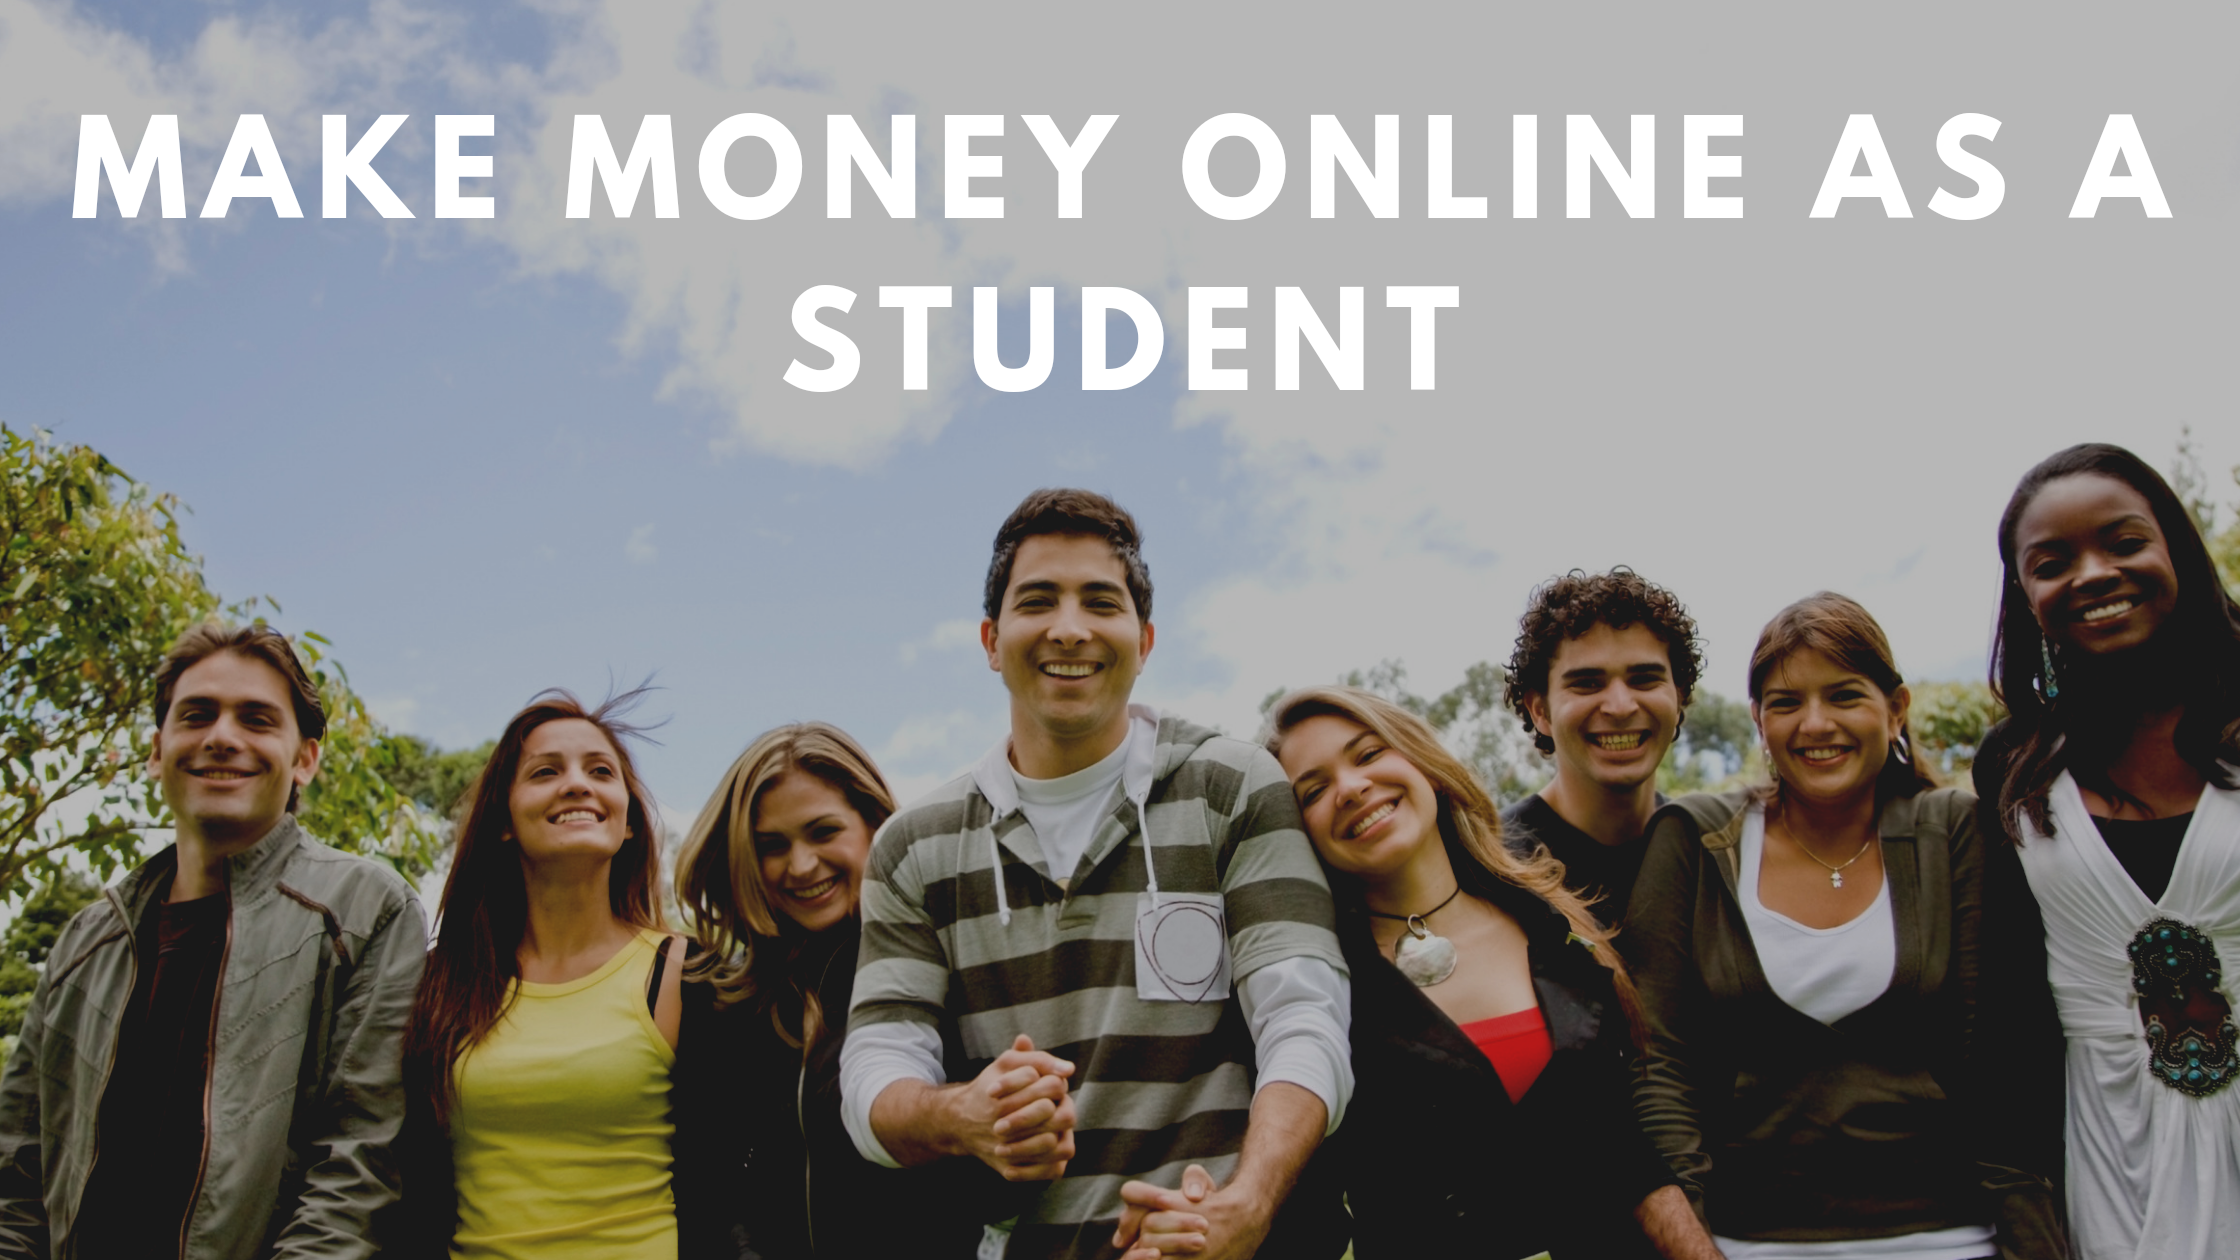 make money online as a student featured